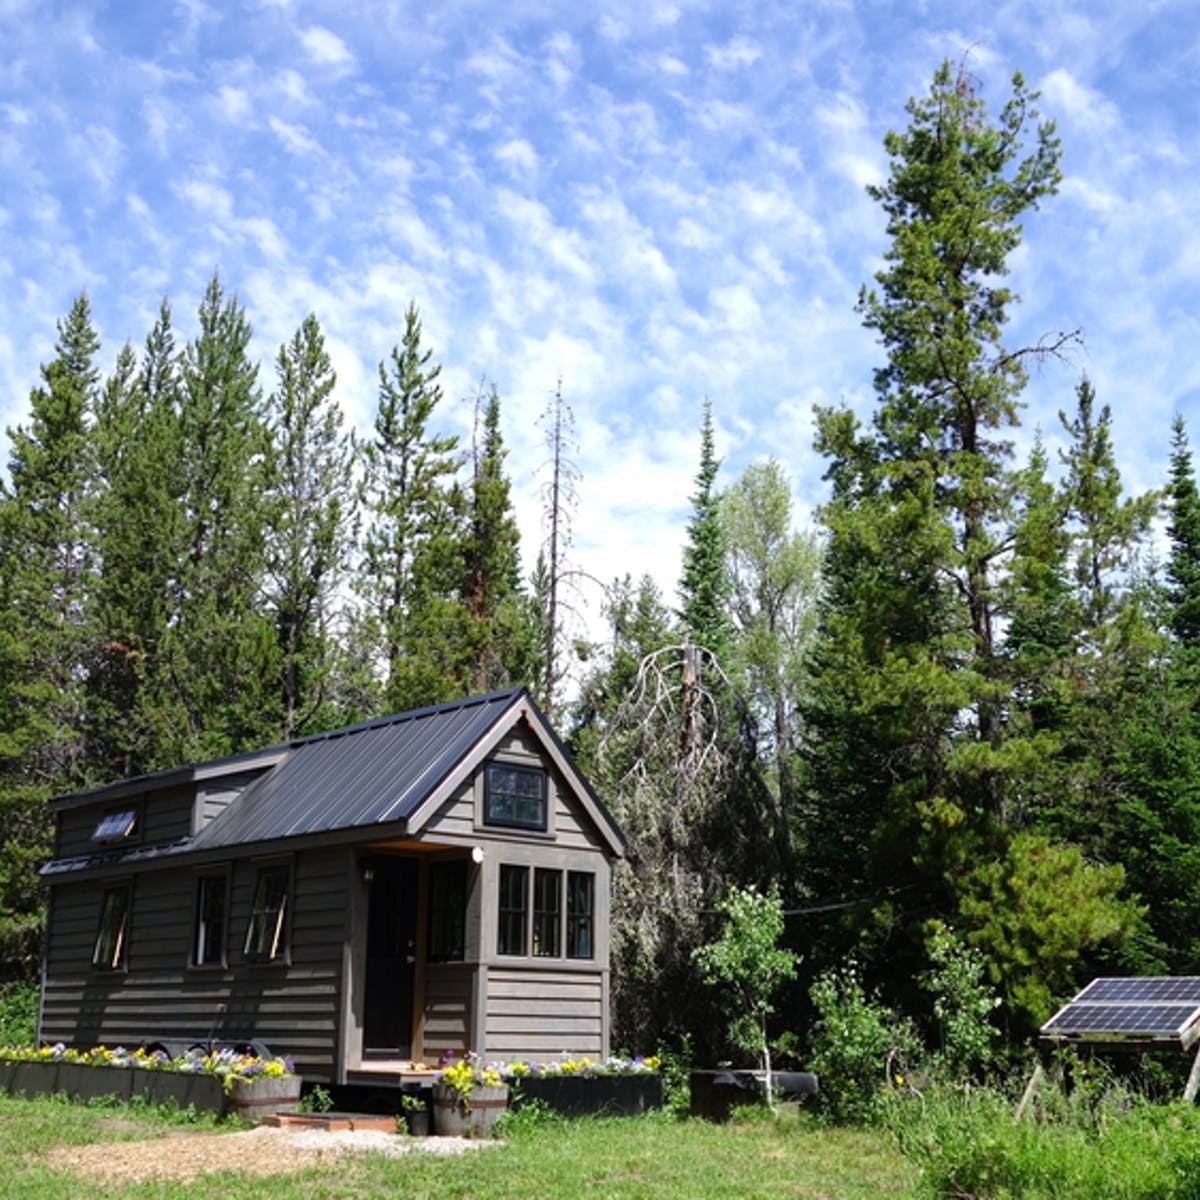 Everything You Need to Know About Off Grid Living